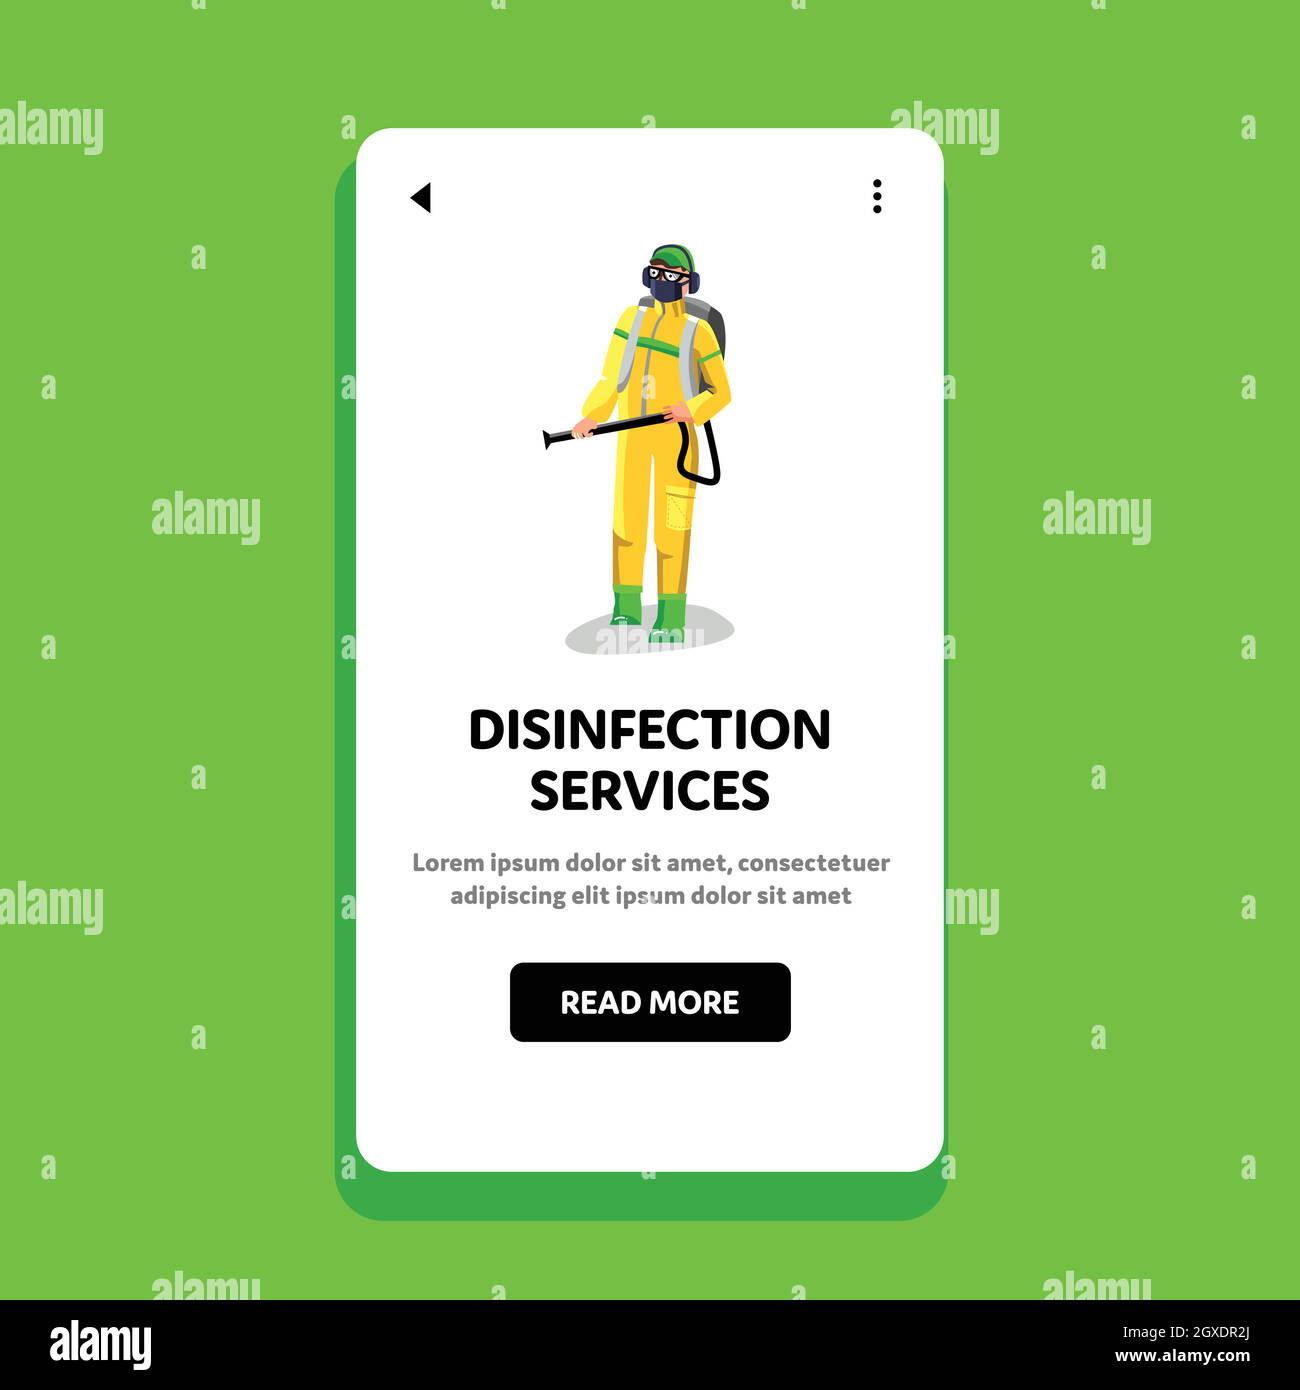 Disinfection Services Worker Disinfecting Vector Flat Illustration Stock Vector